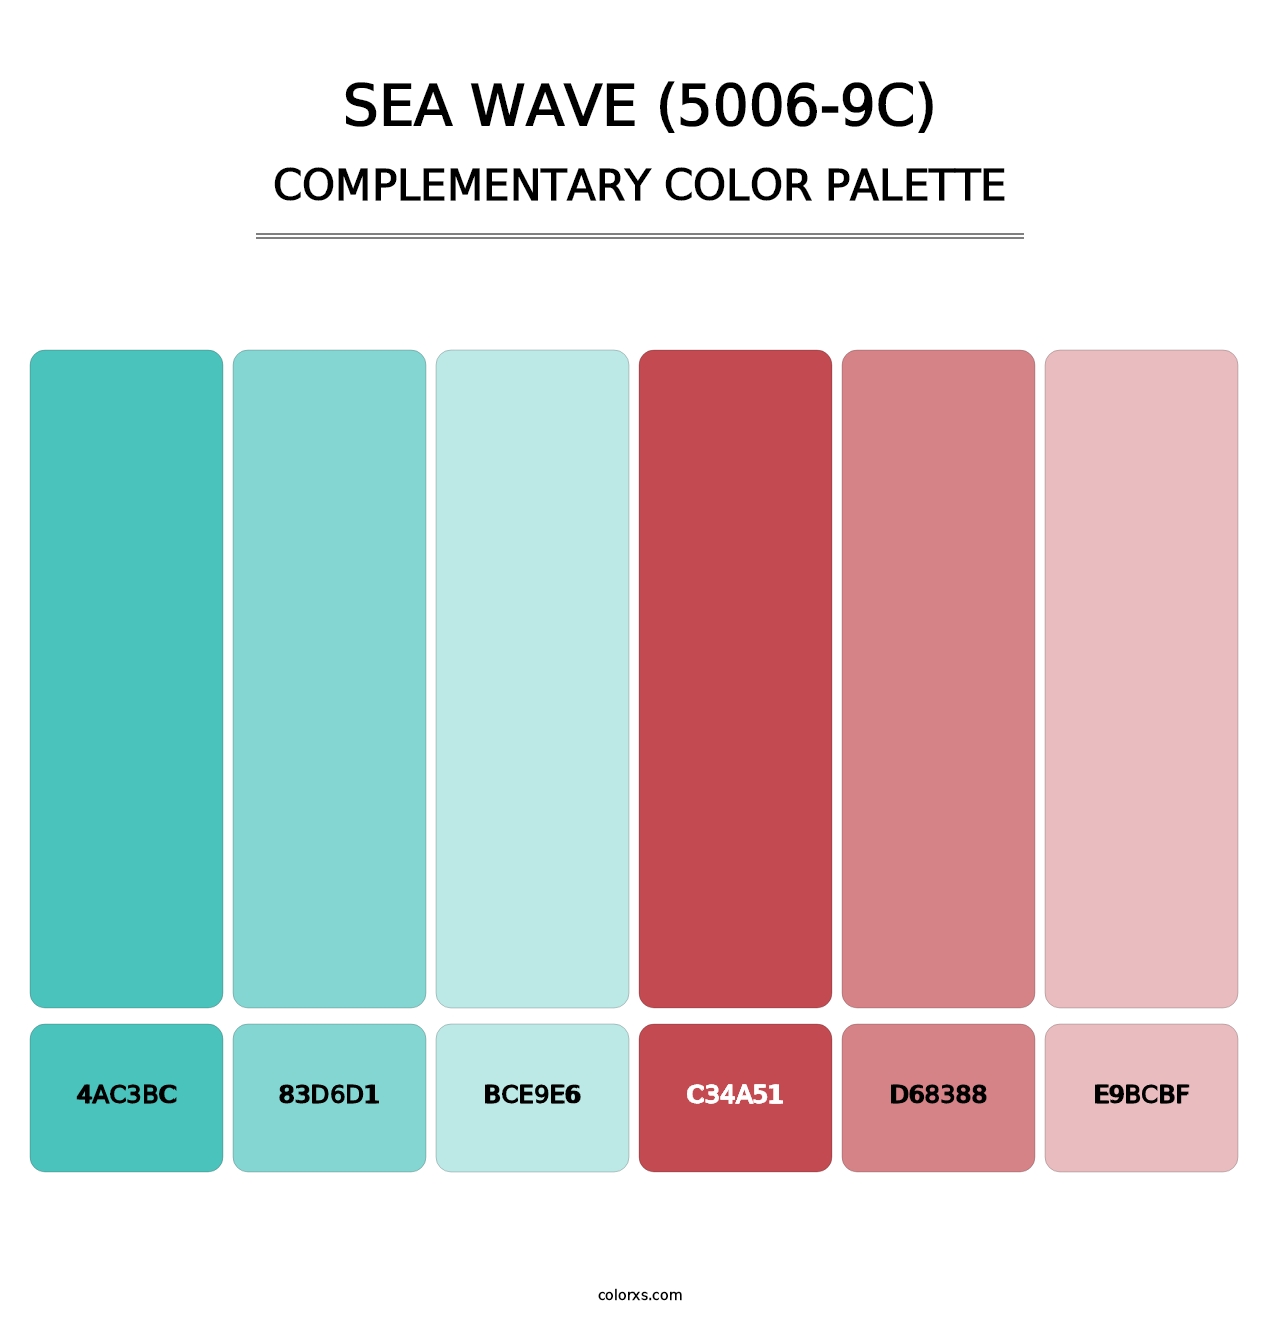 Sea Wave (5006-9C) - Complementary Color Palette